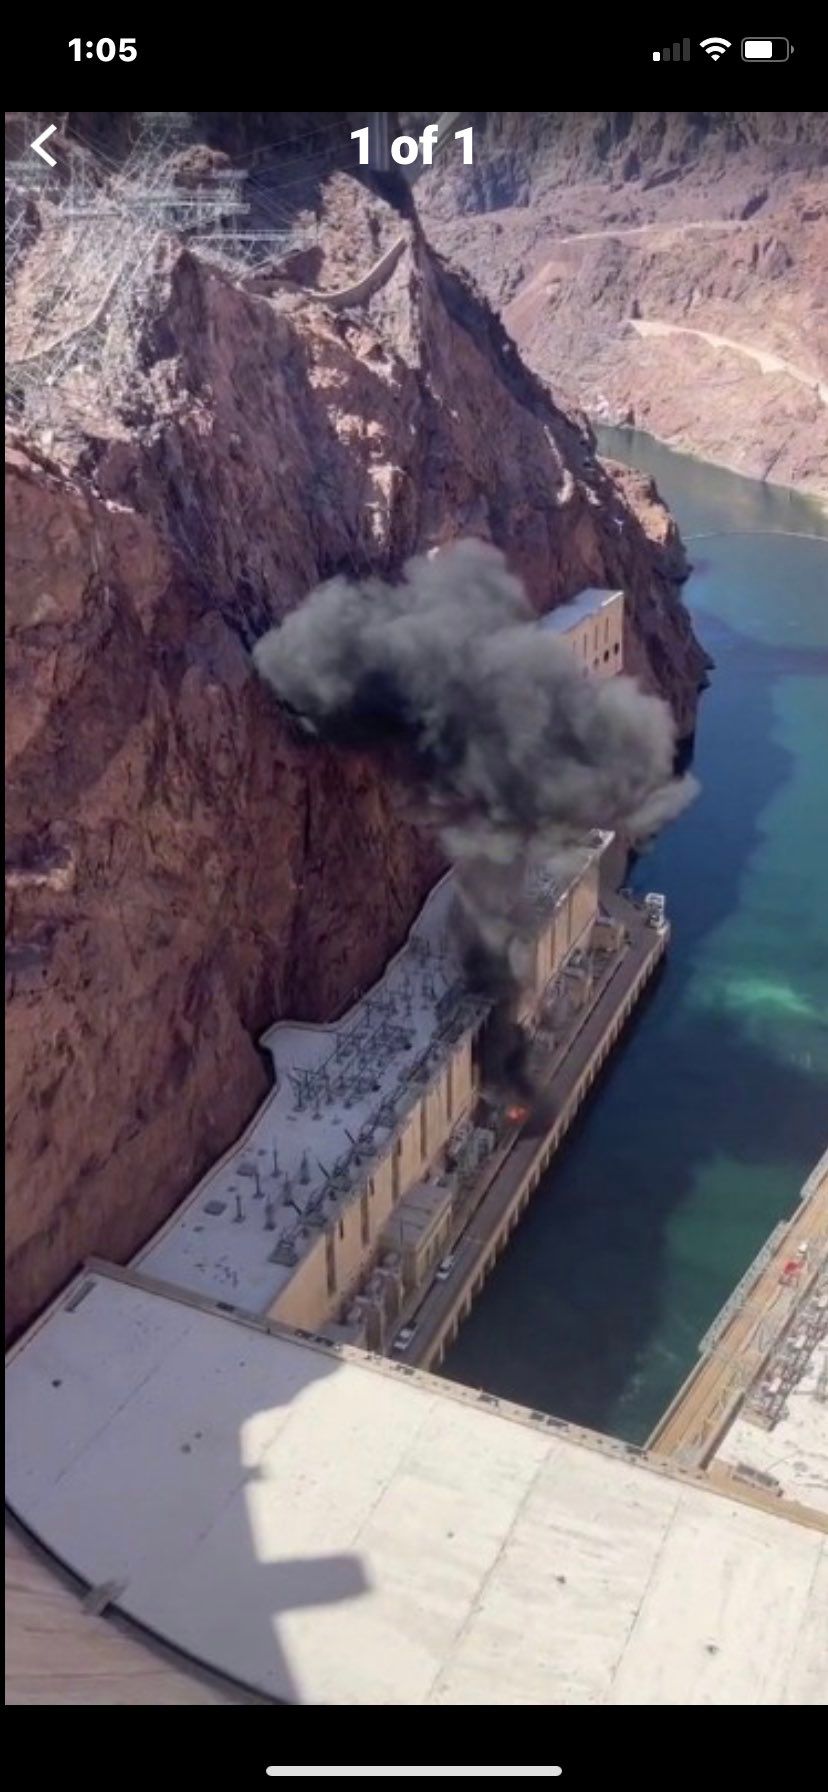 Hoover Dam explosion: All you need to know